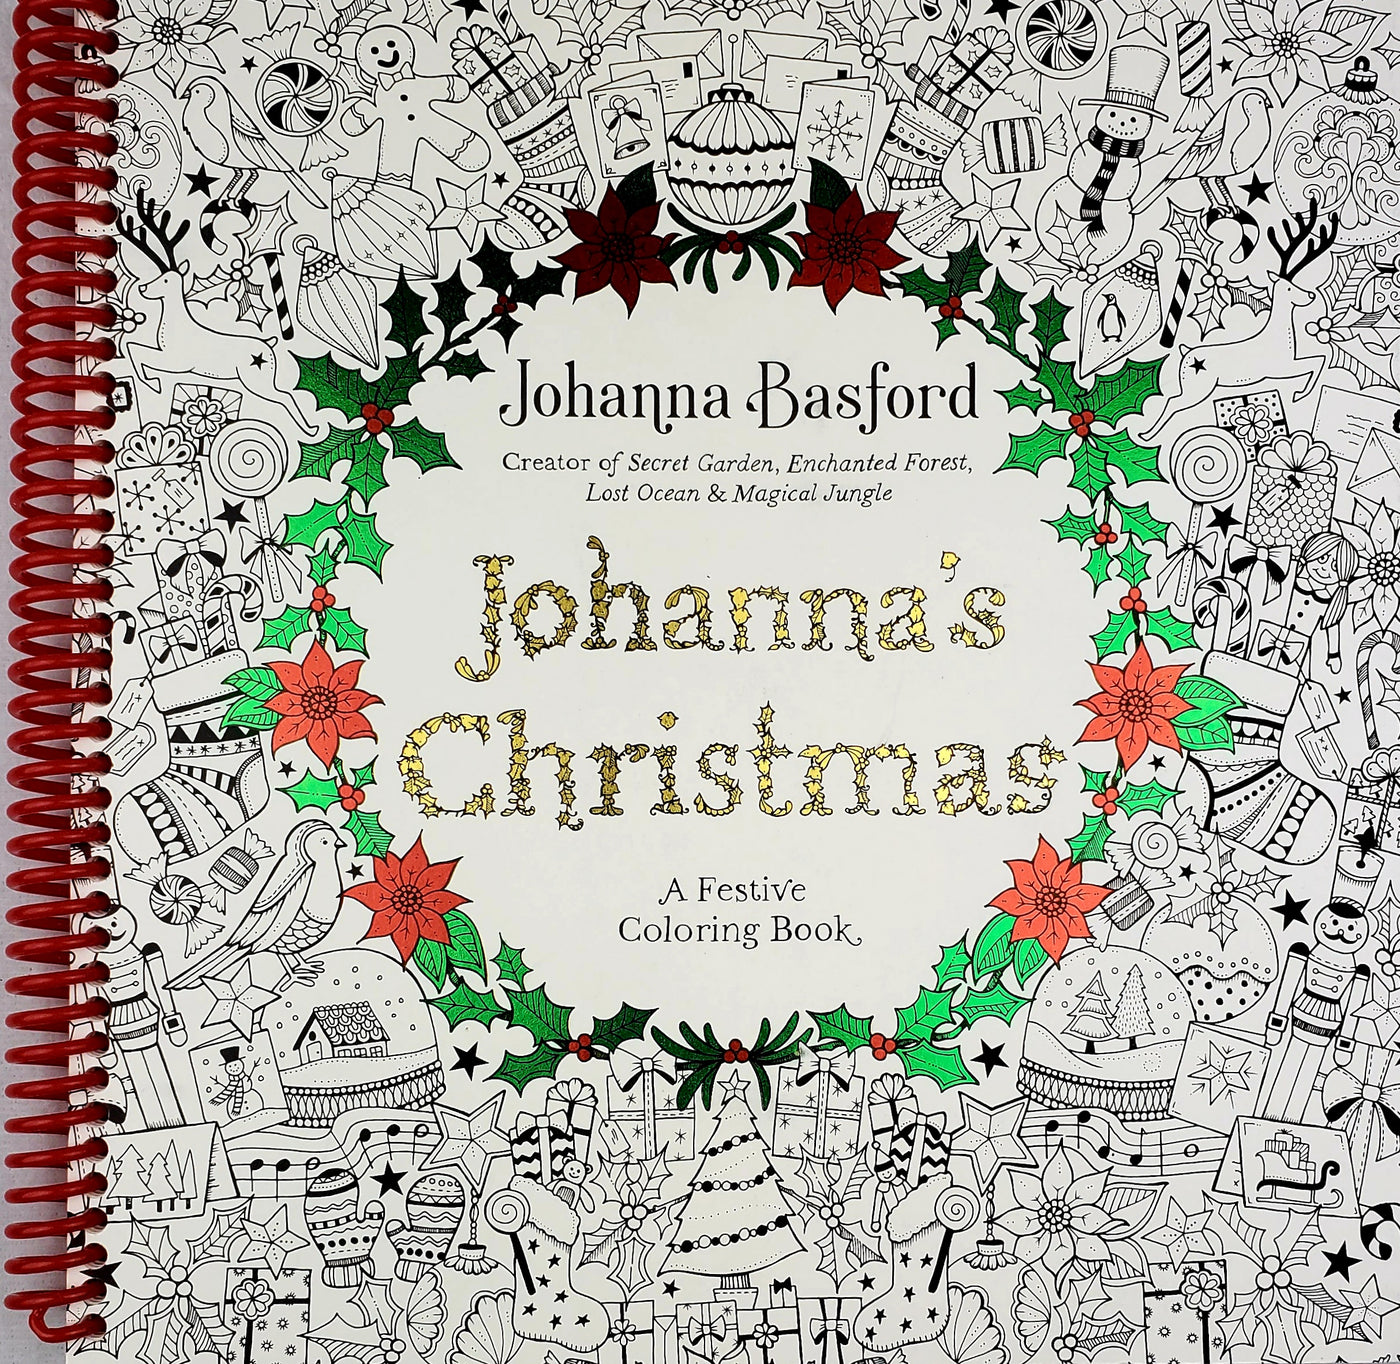 Johanna's Christmas: A Festive Coloring Book for Adults (Spiral Bound)